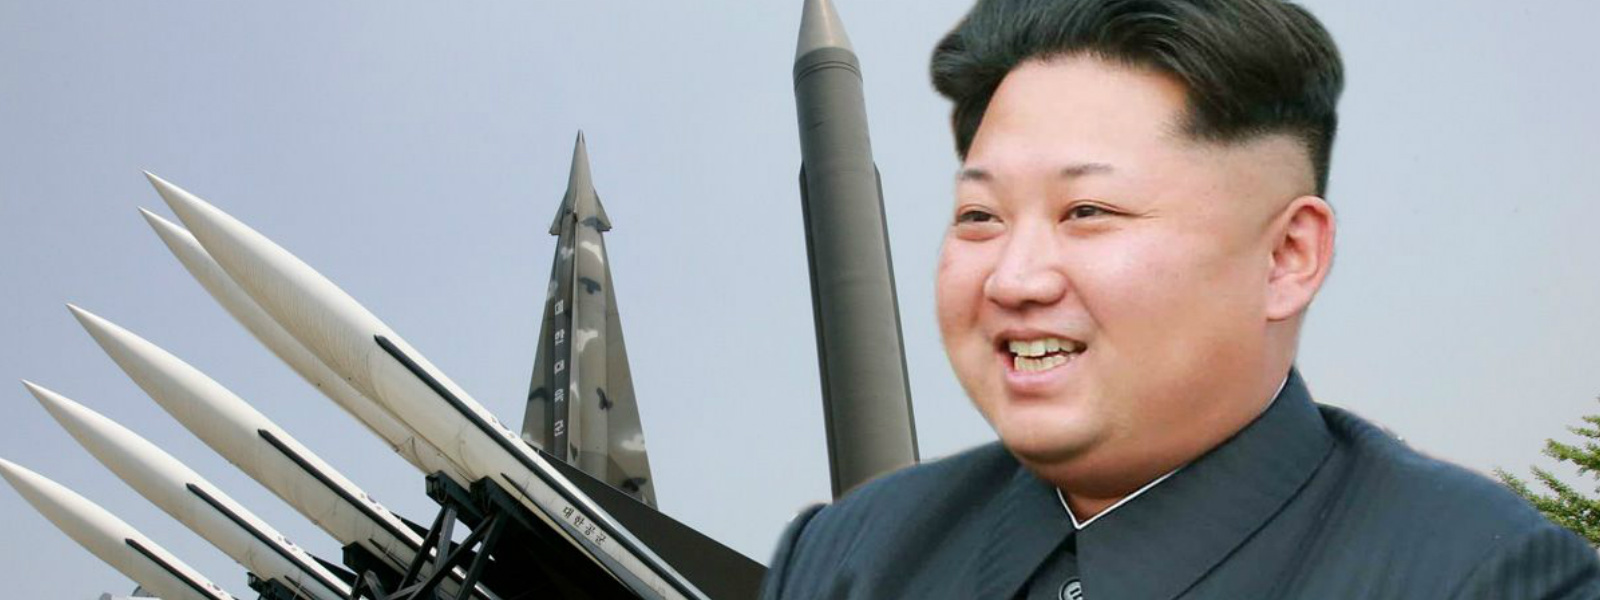 Kim Jong Un says he is ready to denuclearize